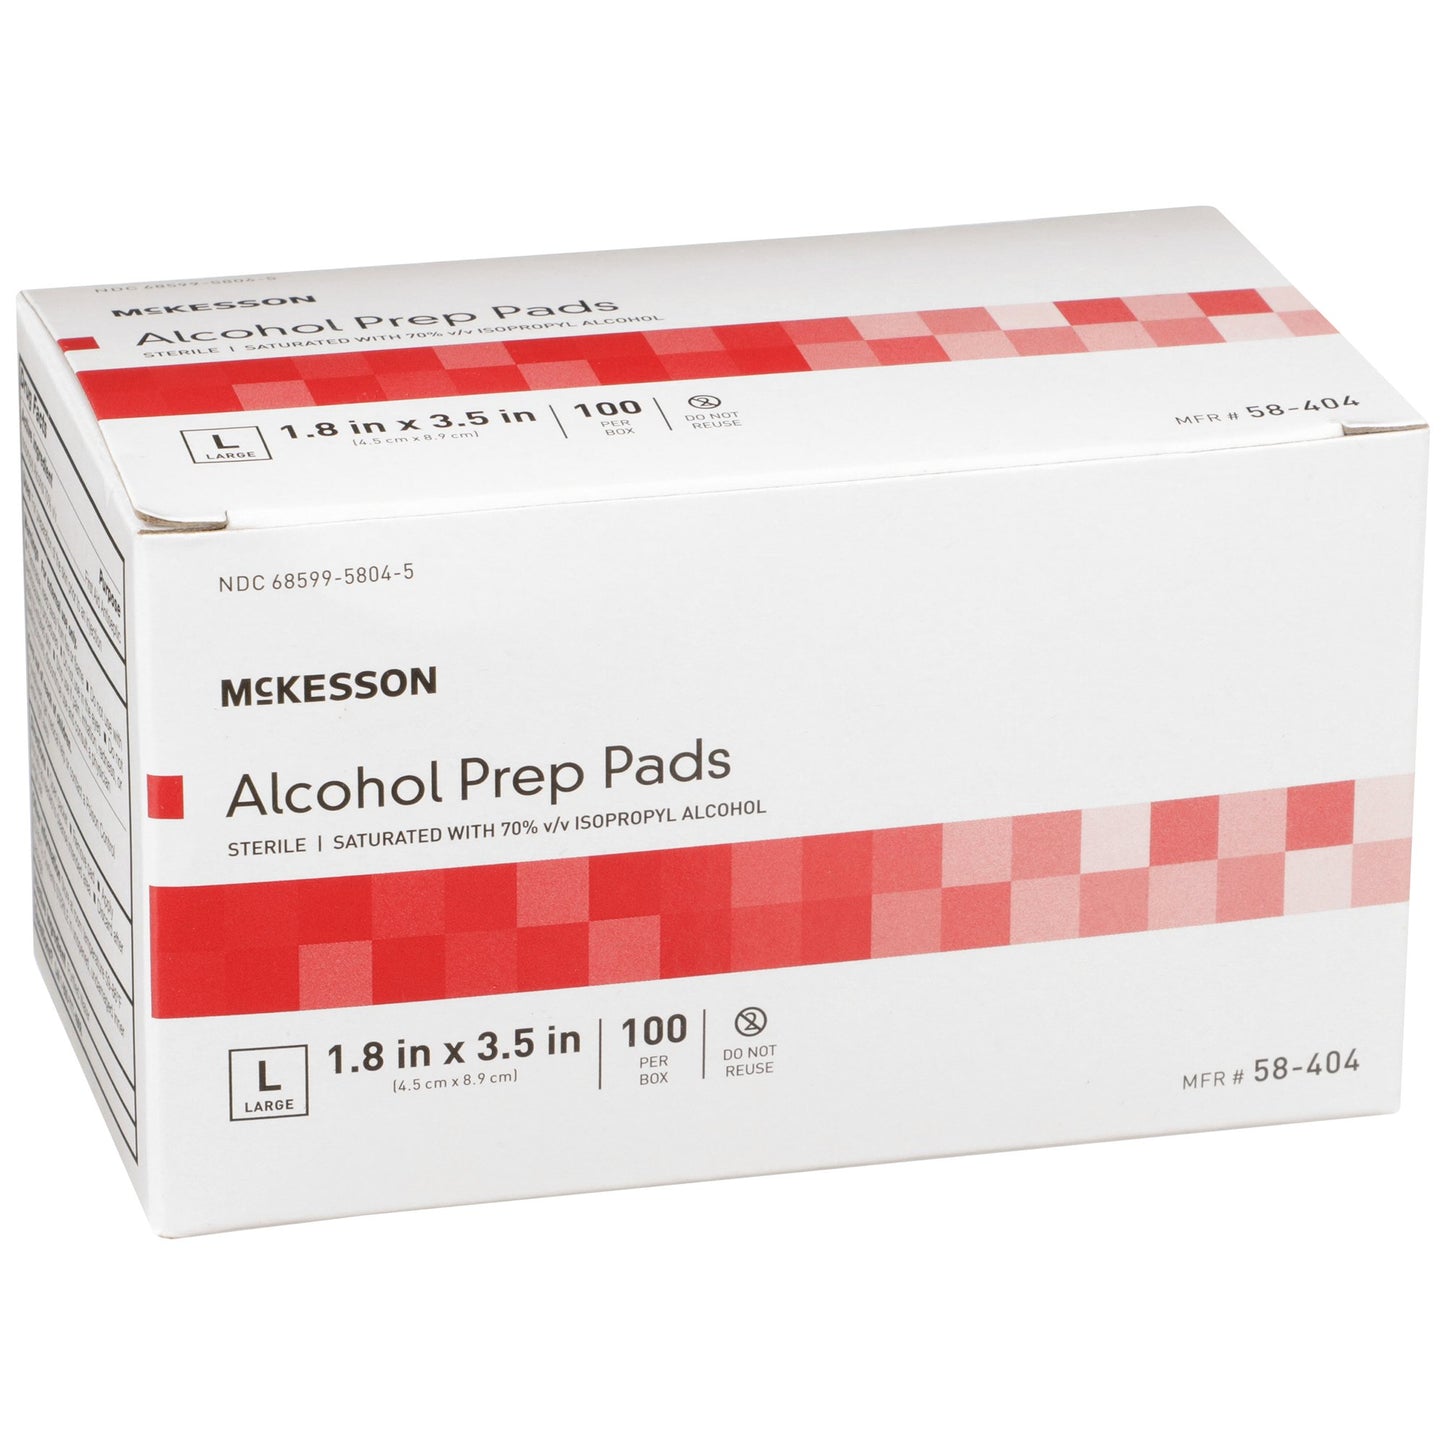 Alcohol Prep Pad McKesson 70% Strength Isopropyl Alcohol Individual Packet Large Sterile, 1000 ct